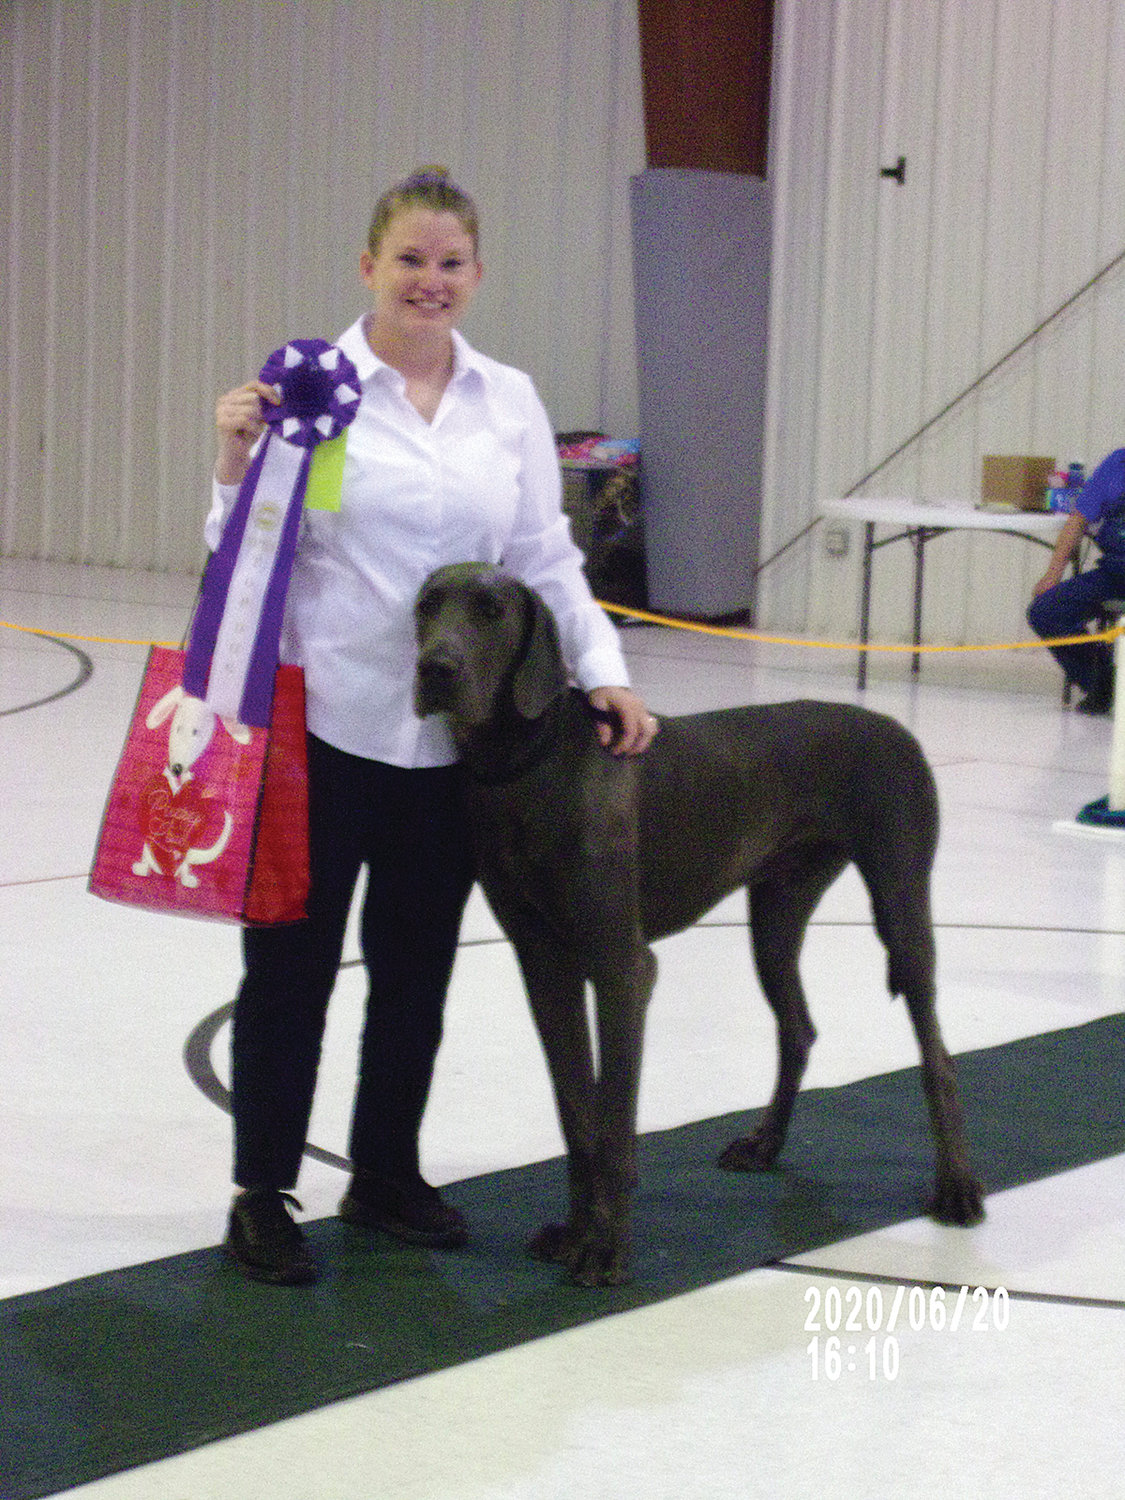 This Blue Great Dane, “Allisons’ the Legend Lives on at PDK” was Top Dog of show two.